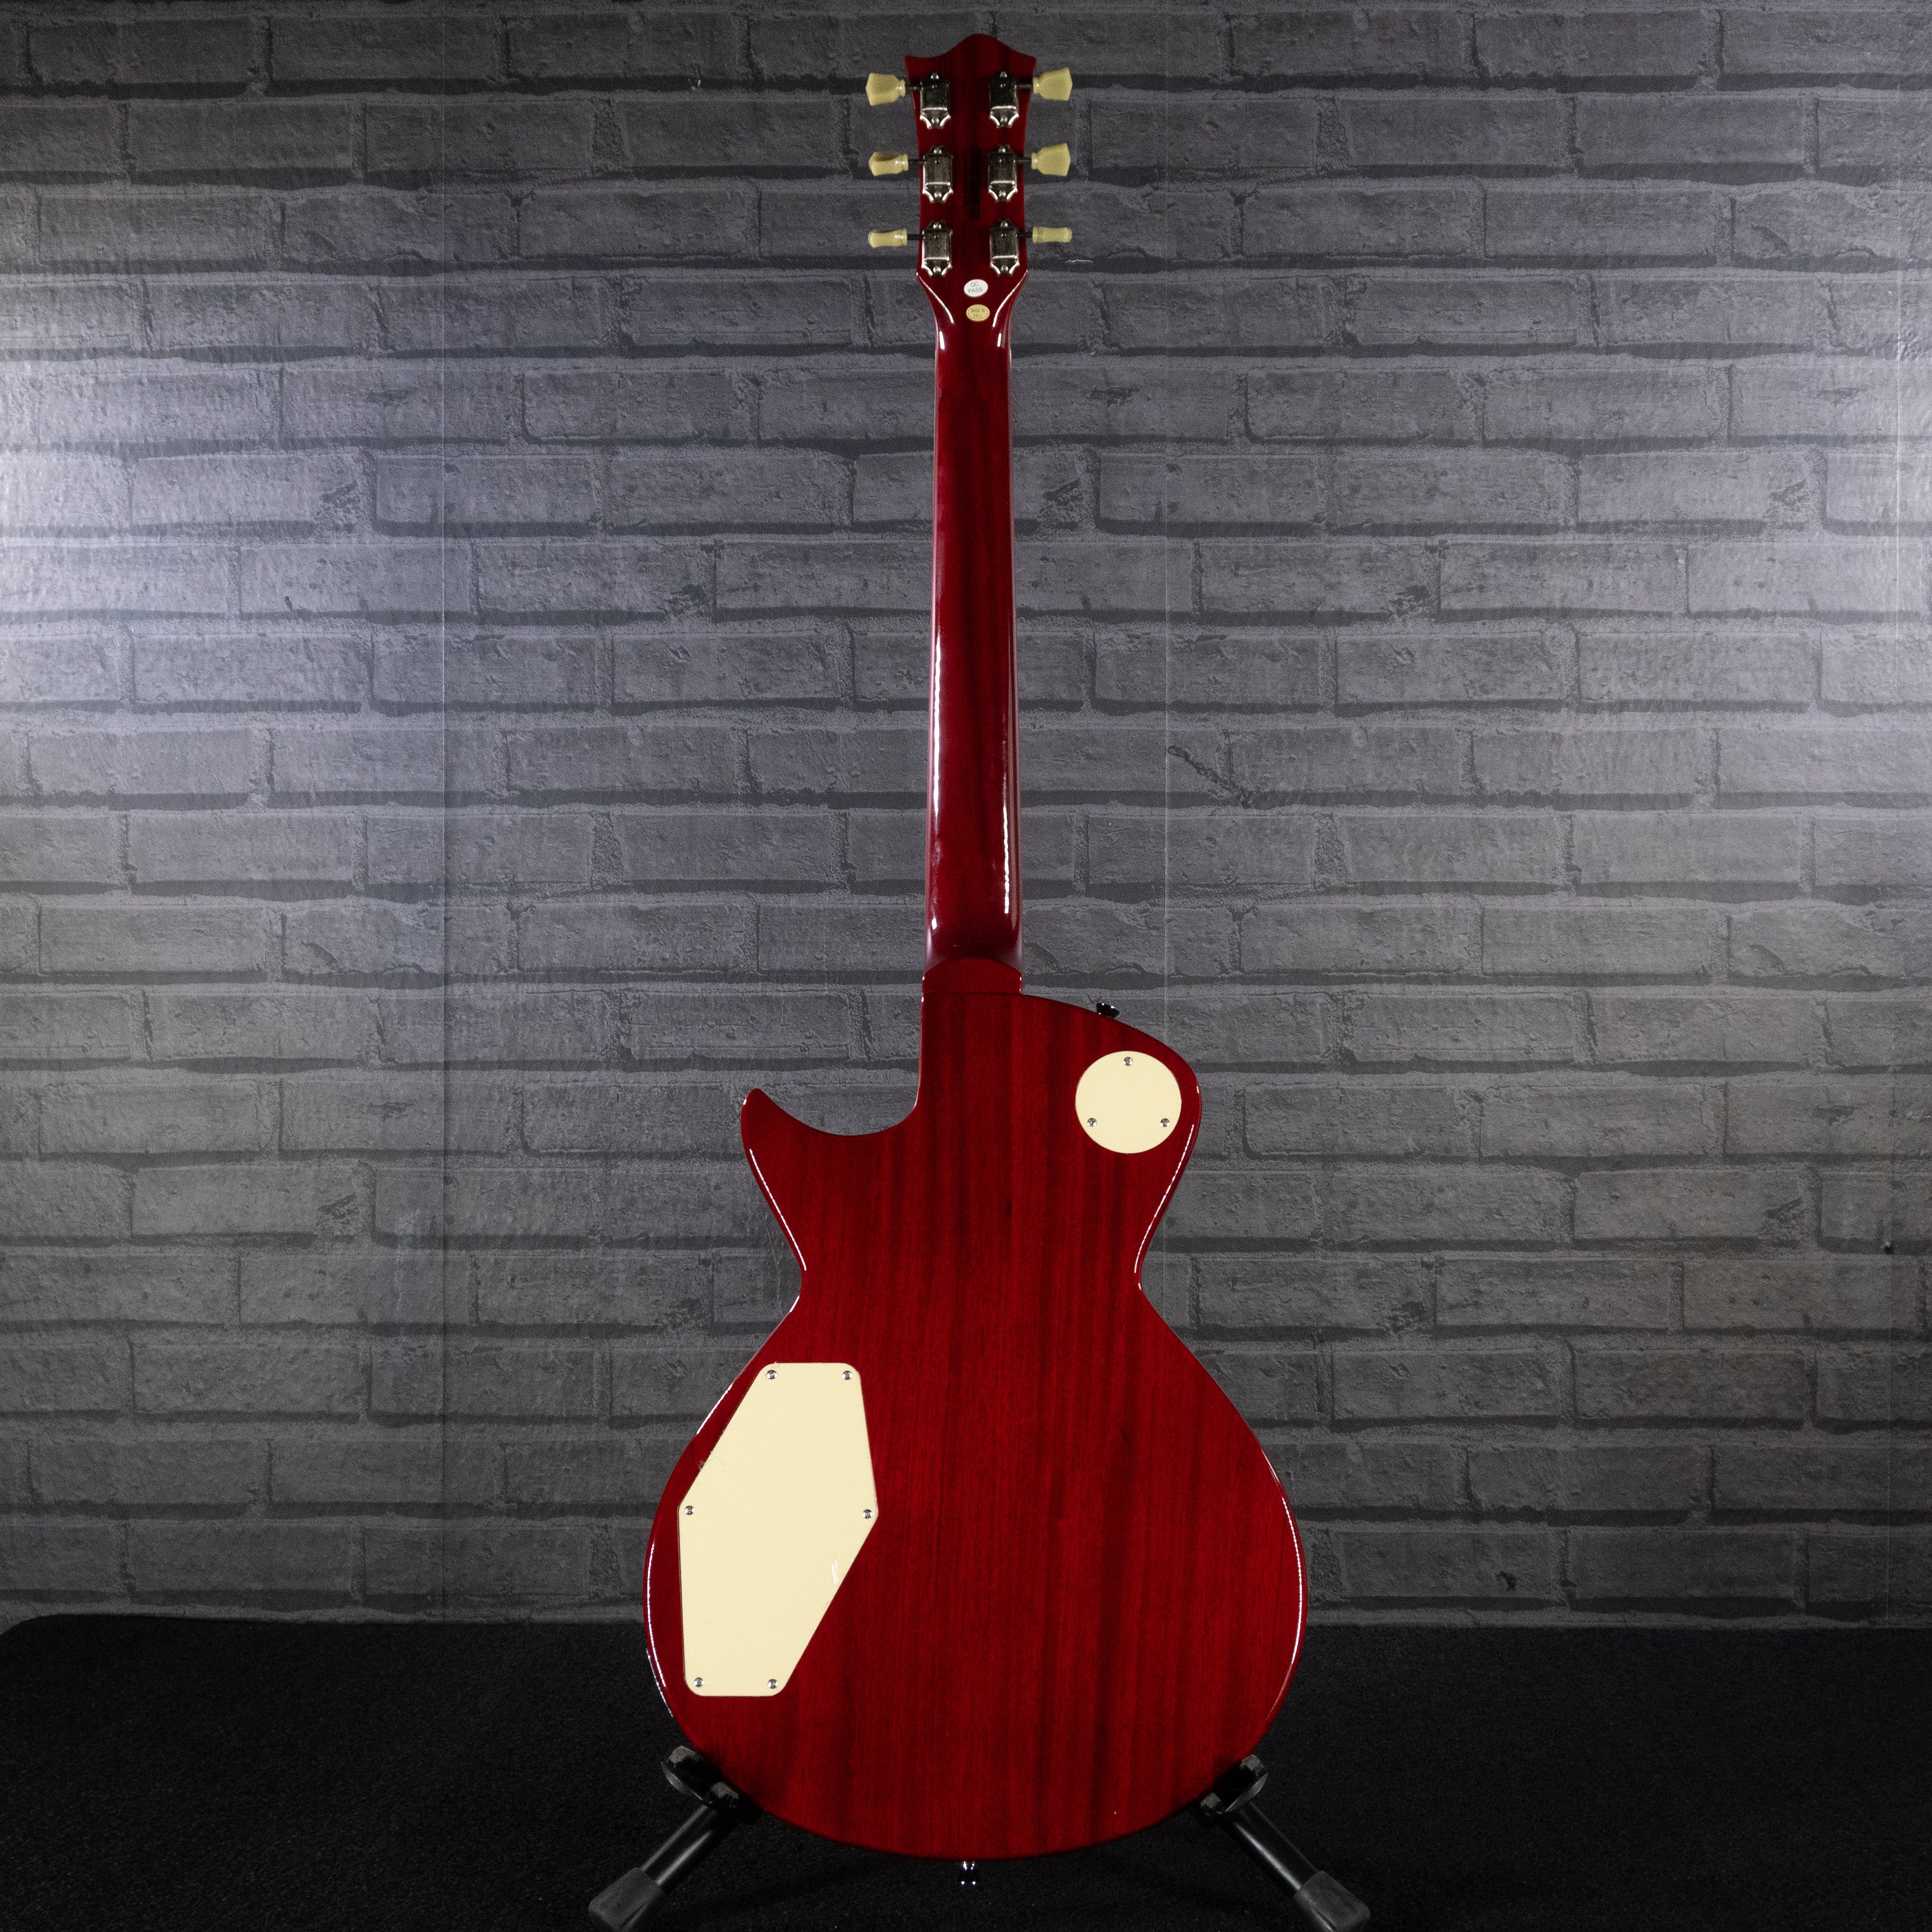 Tagima Mirach Electric Guitar (Trans Red)